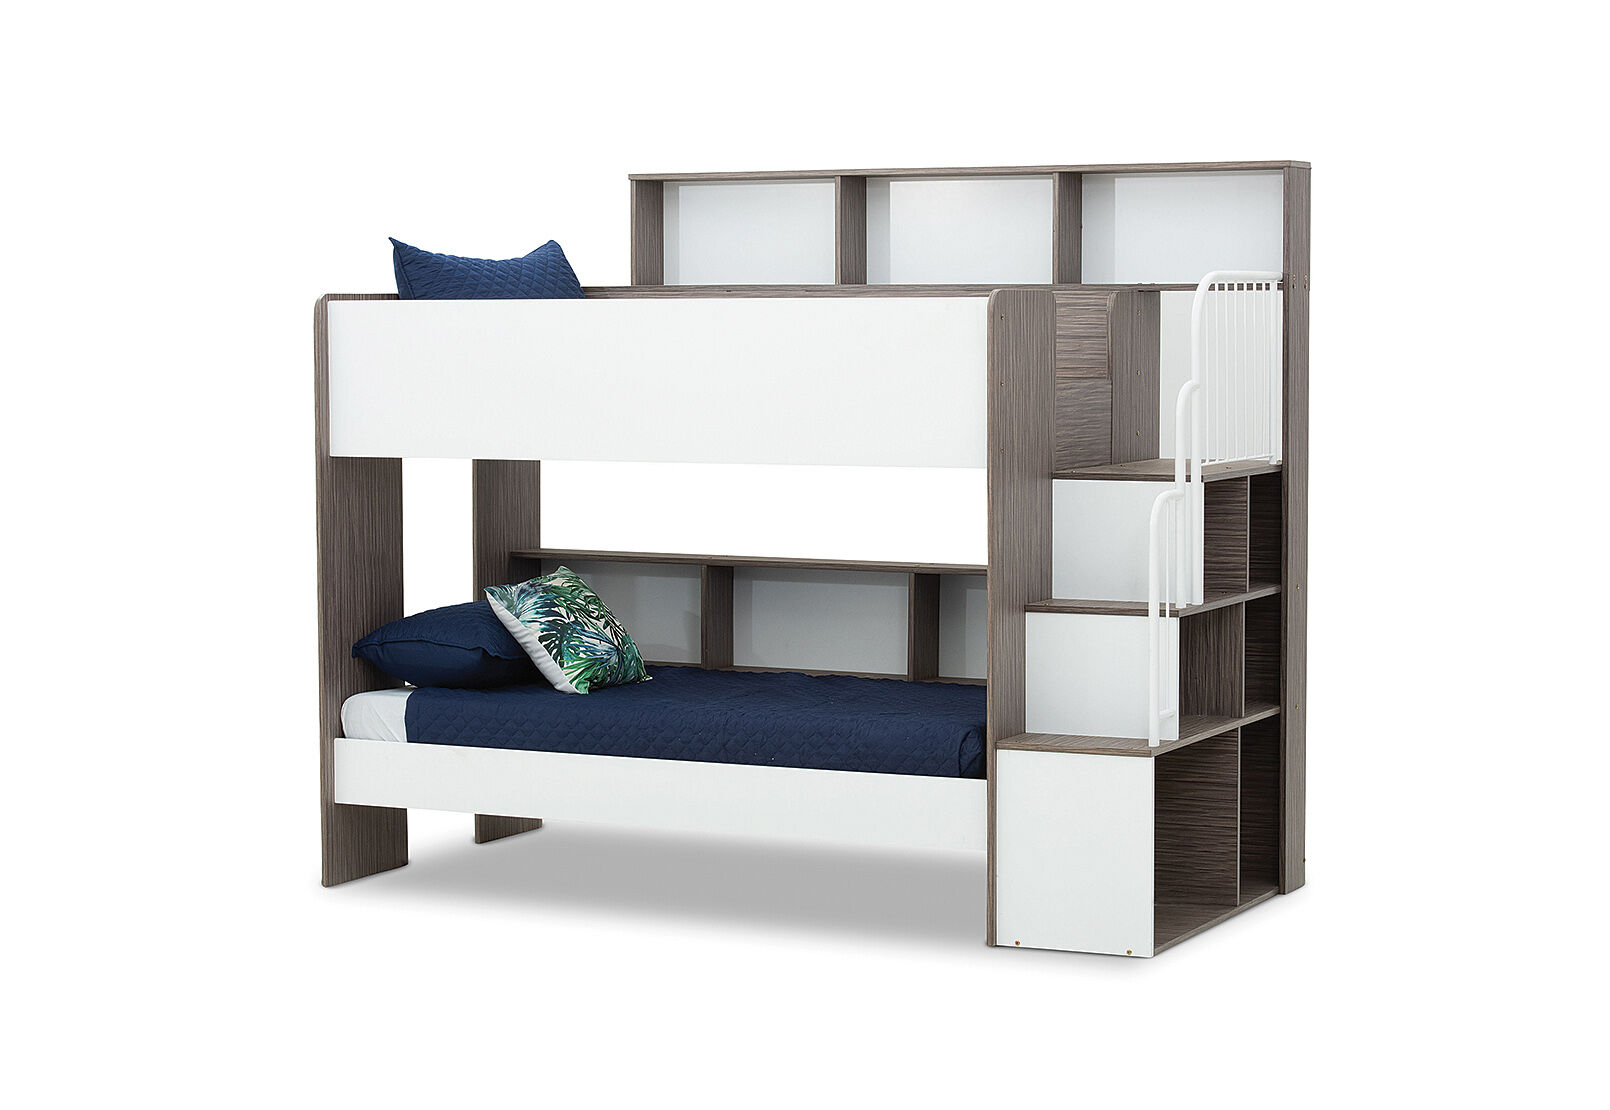 White Tango Jason Mk2 Double Bunk Bed, Wooden Bunk Bed Instructions